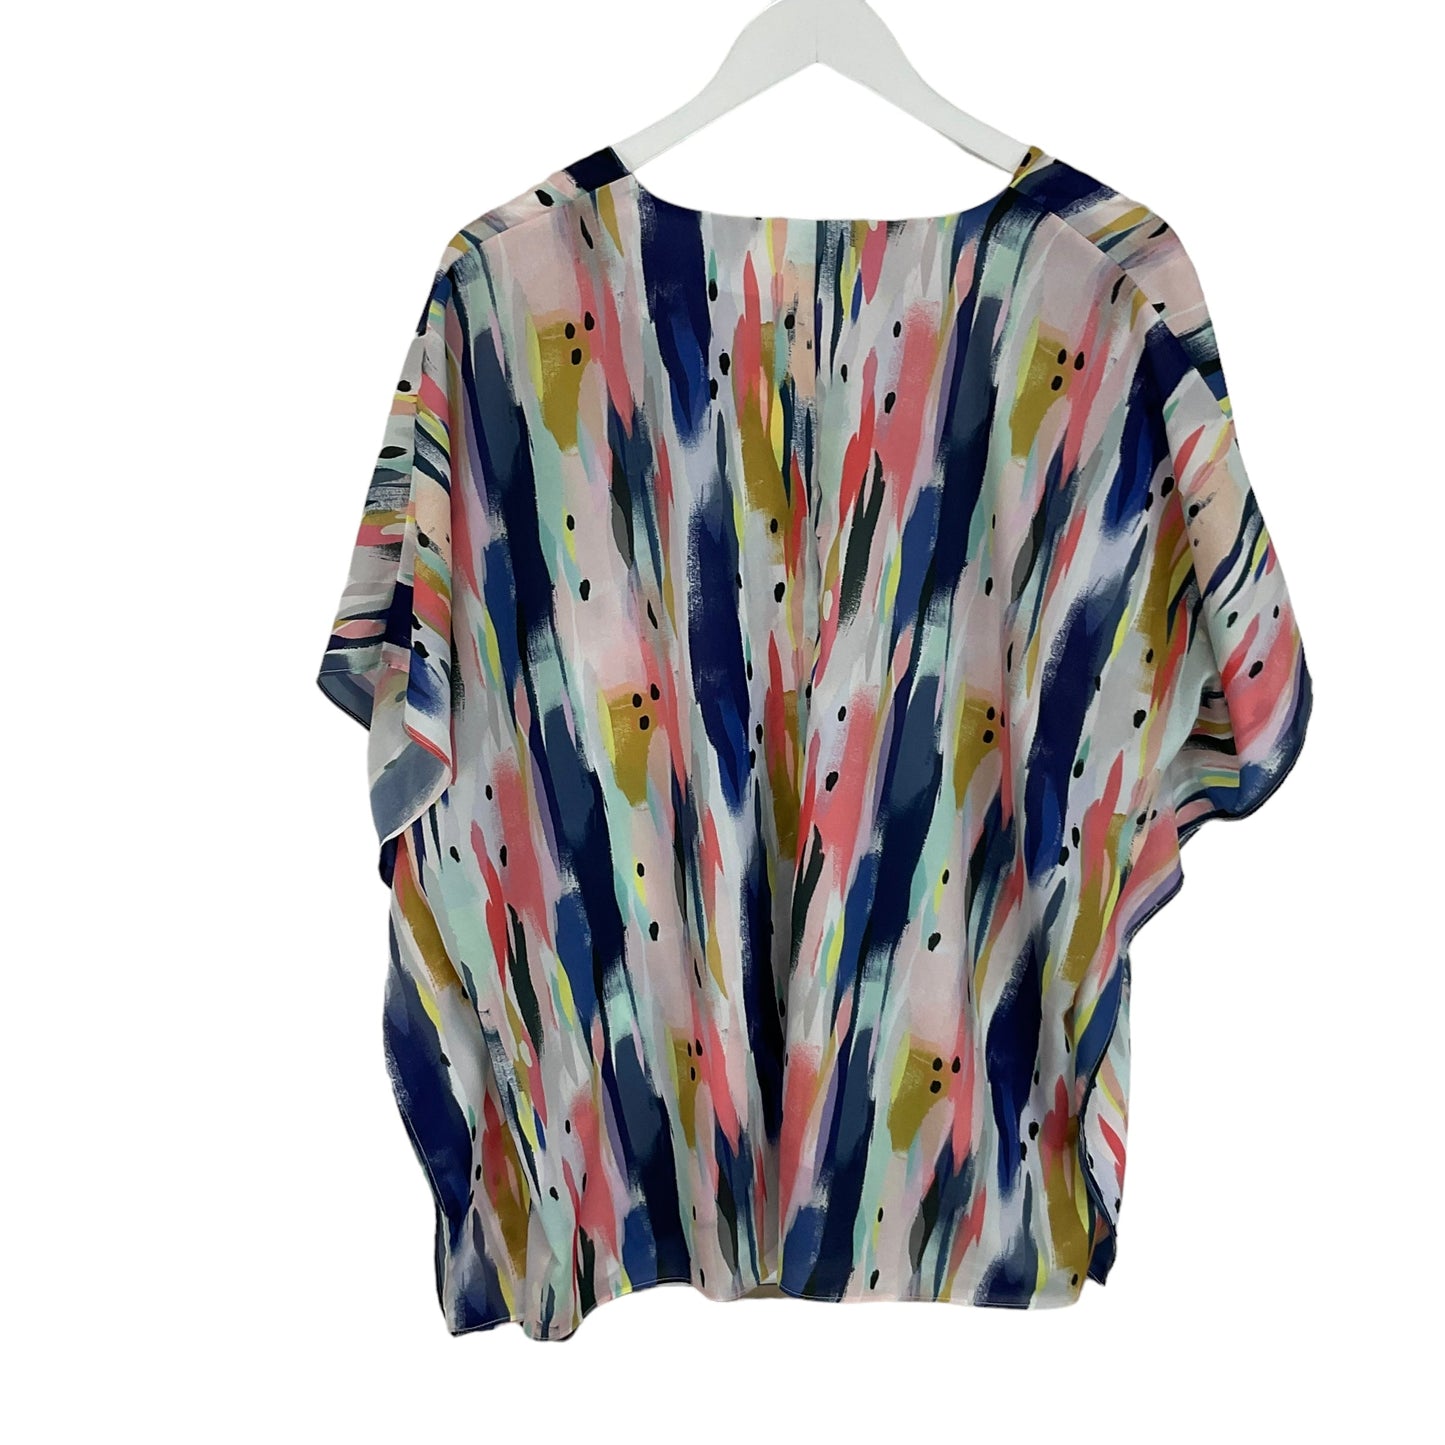 Multi-colored Blouse Short Sleeve Clothes Mentor, Size S